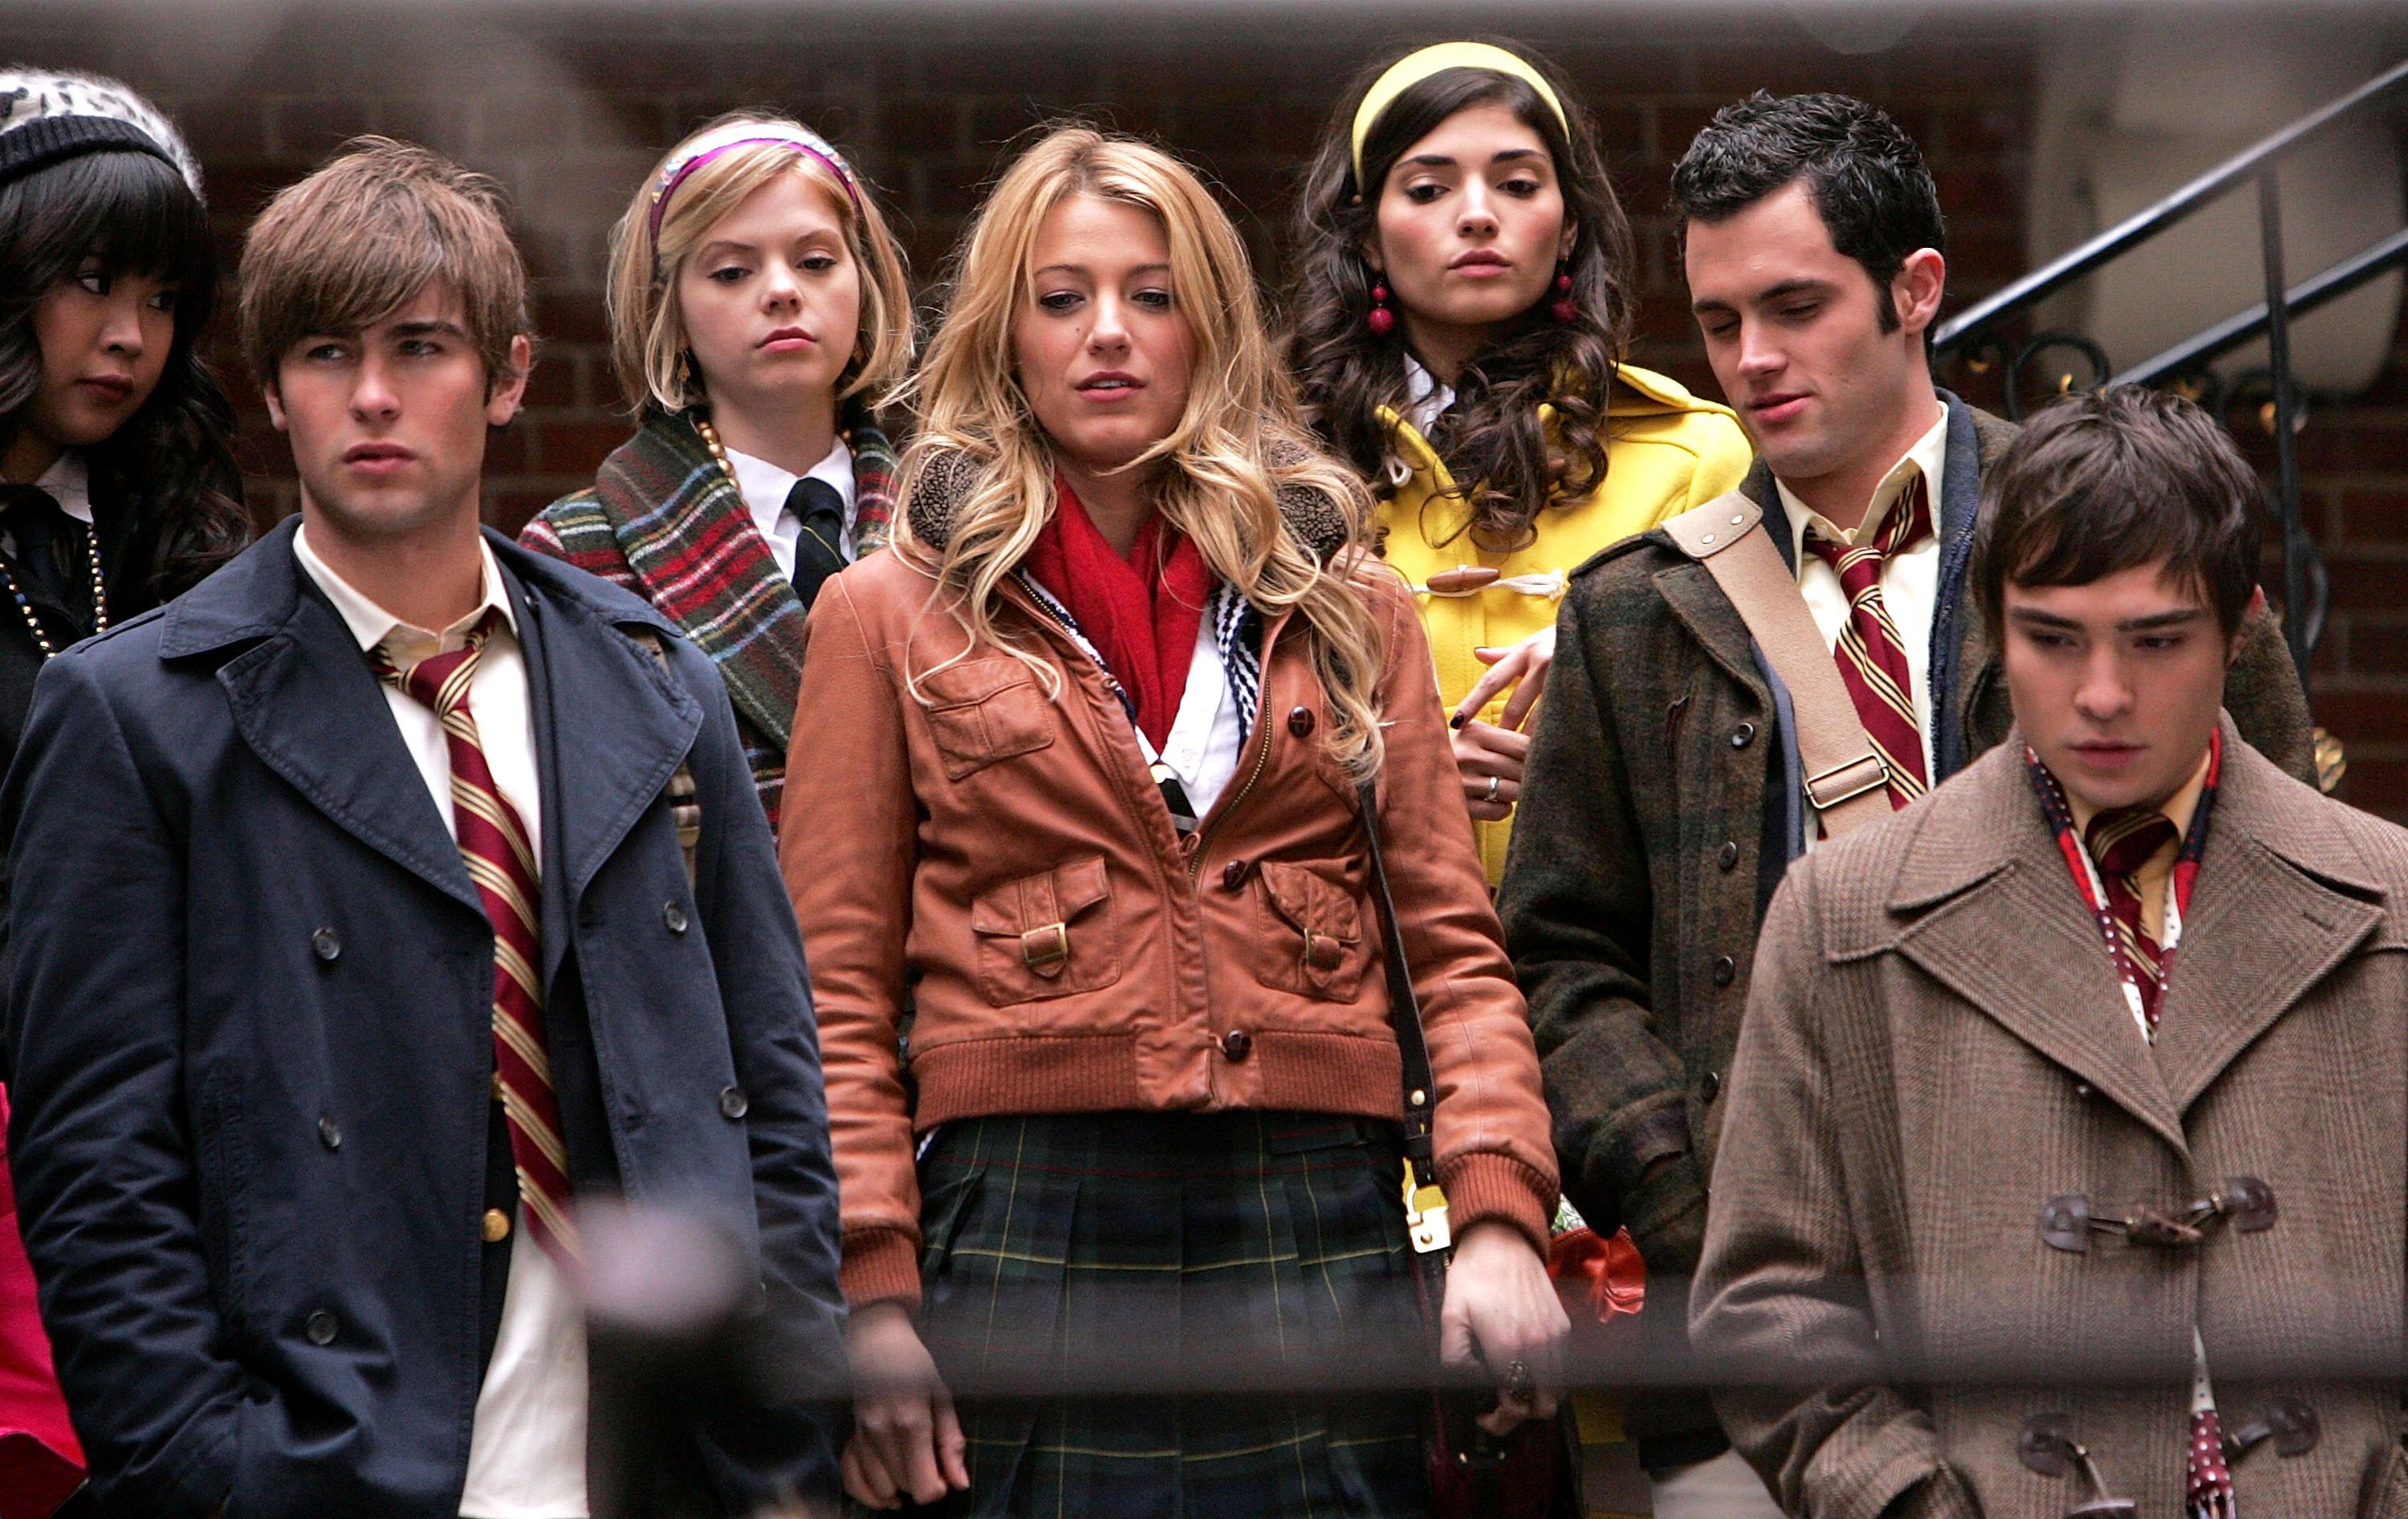 which gossip girl character are you